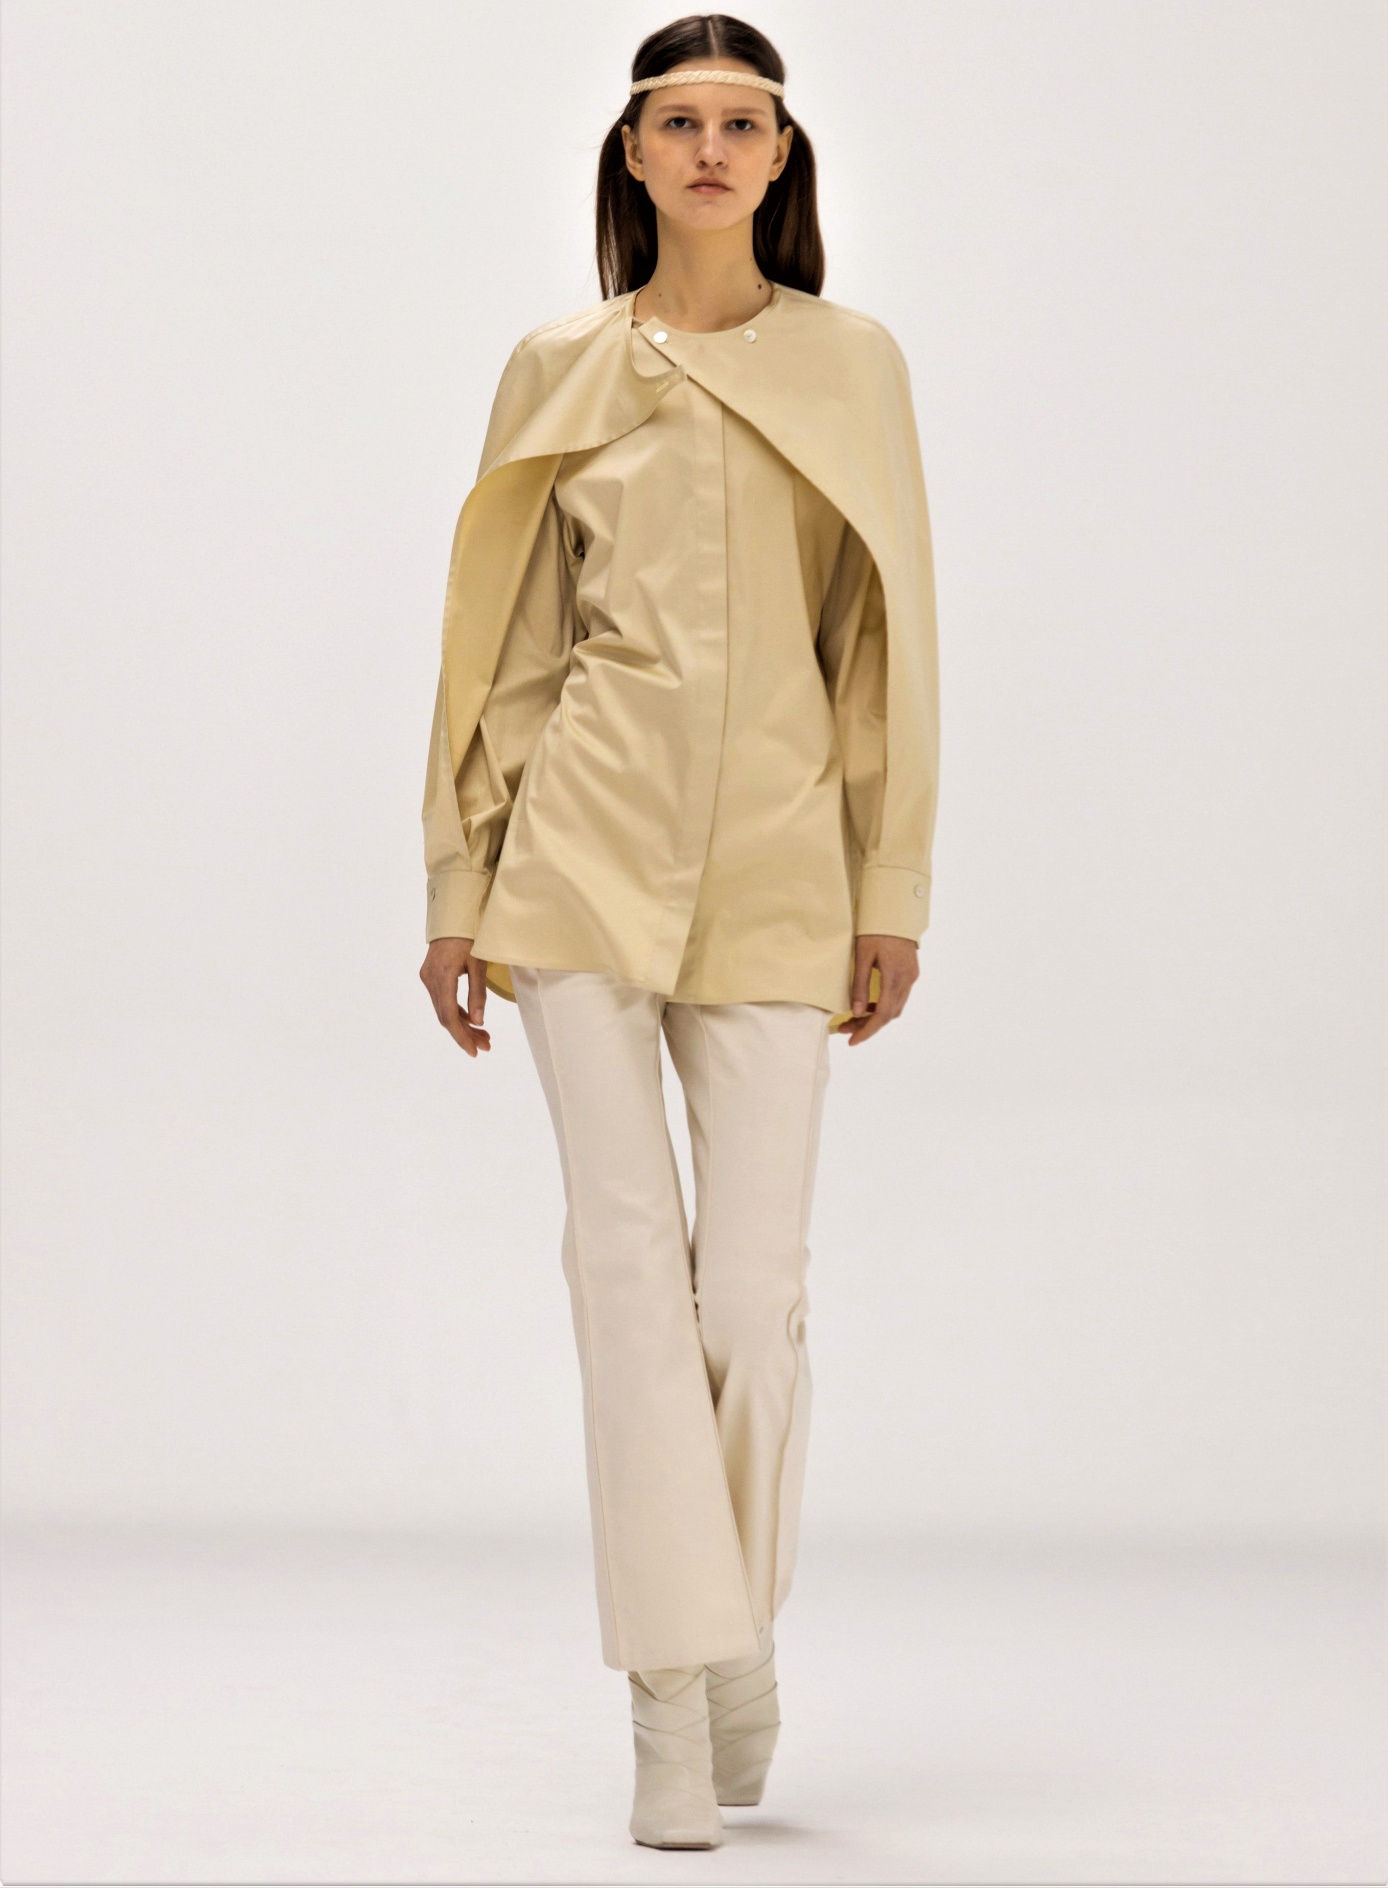 00005-Bevza-Fall-21 wht and crean top NYFW 3 vogue cropped.jpg